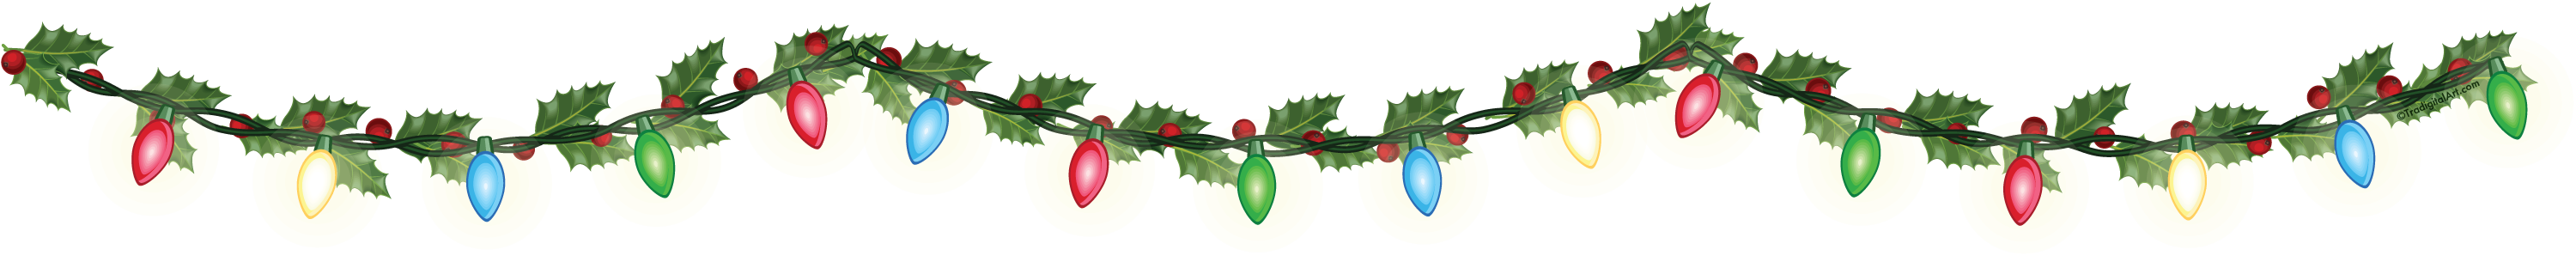 Download Free Christmas Lights Png Transparent Images Download Free Clip Art Free Clip Art On Clipart Library SVG Cut Files